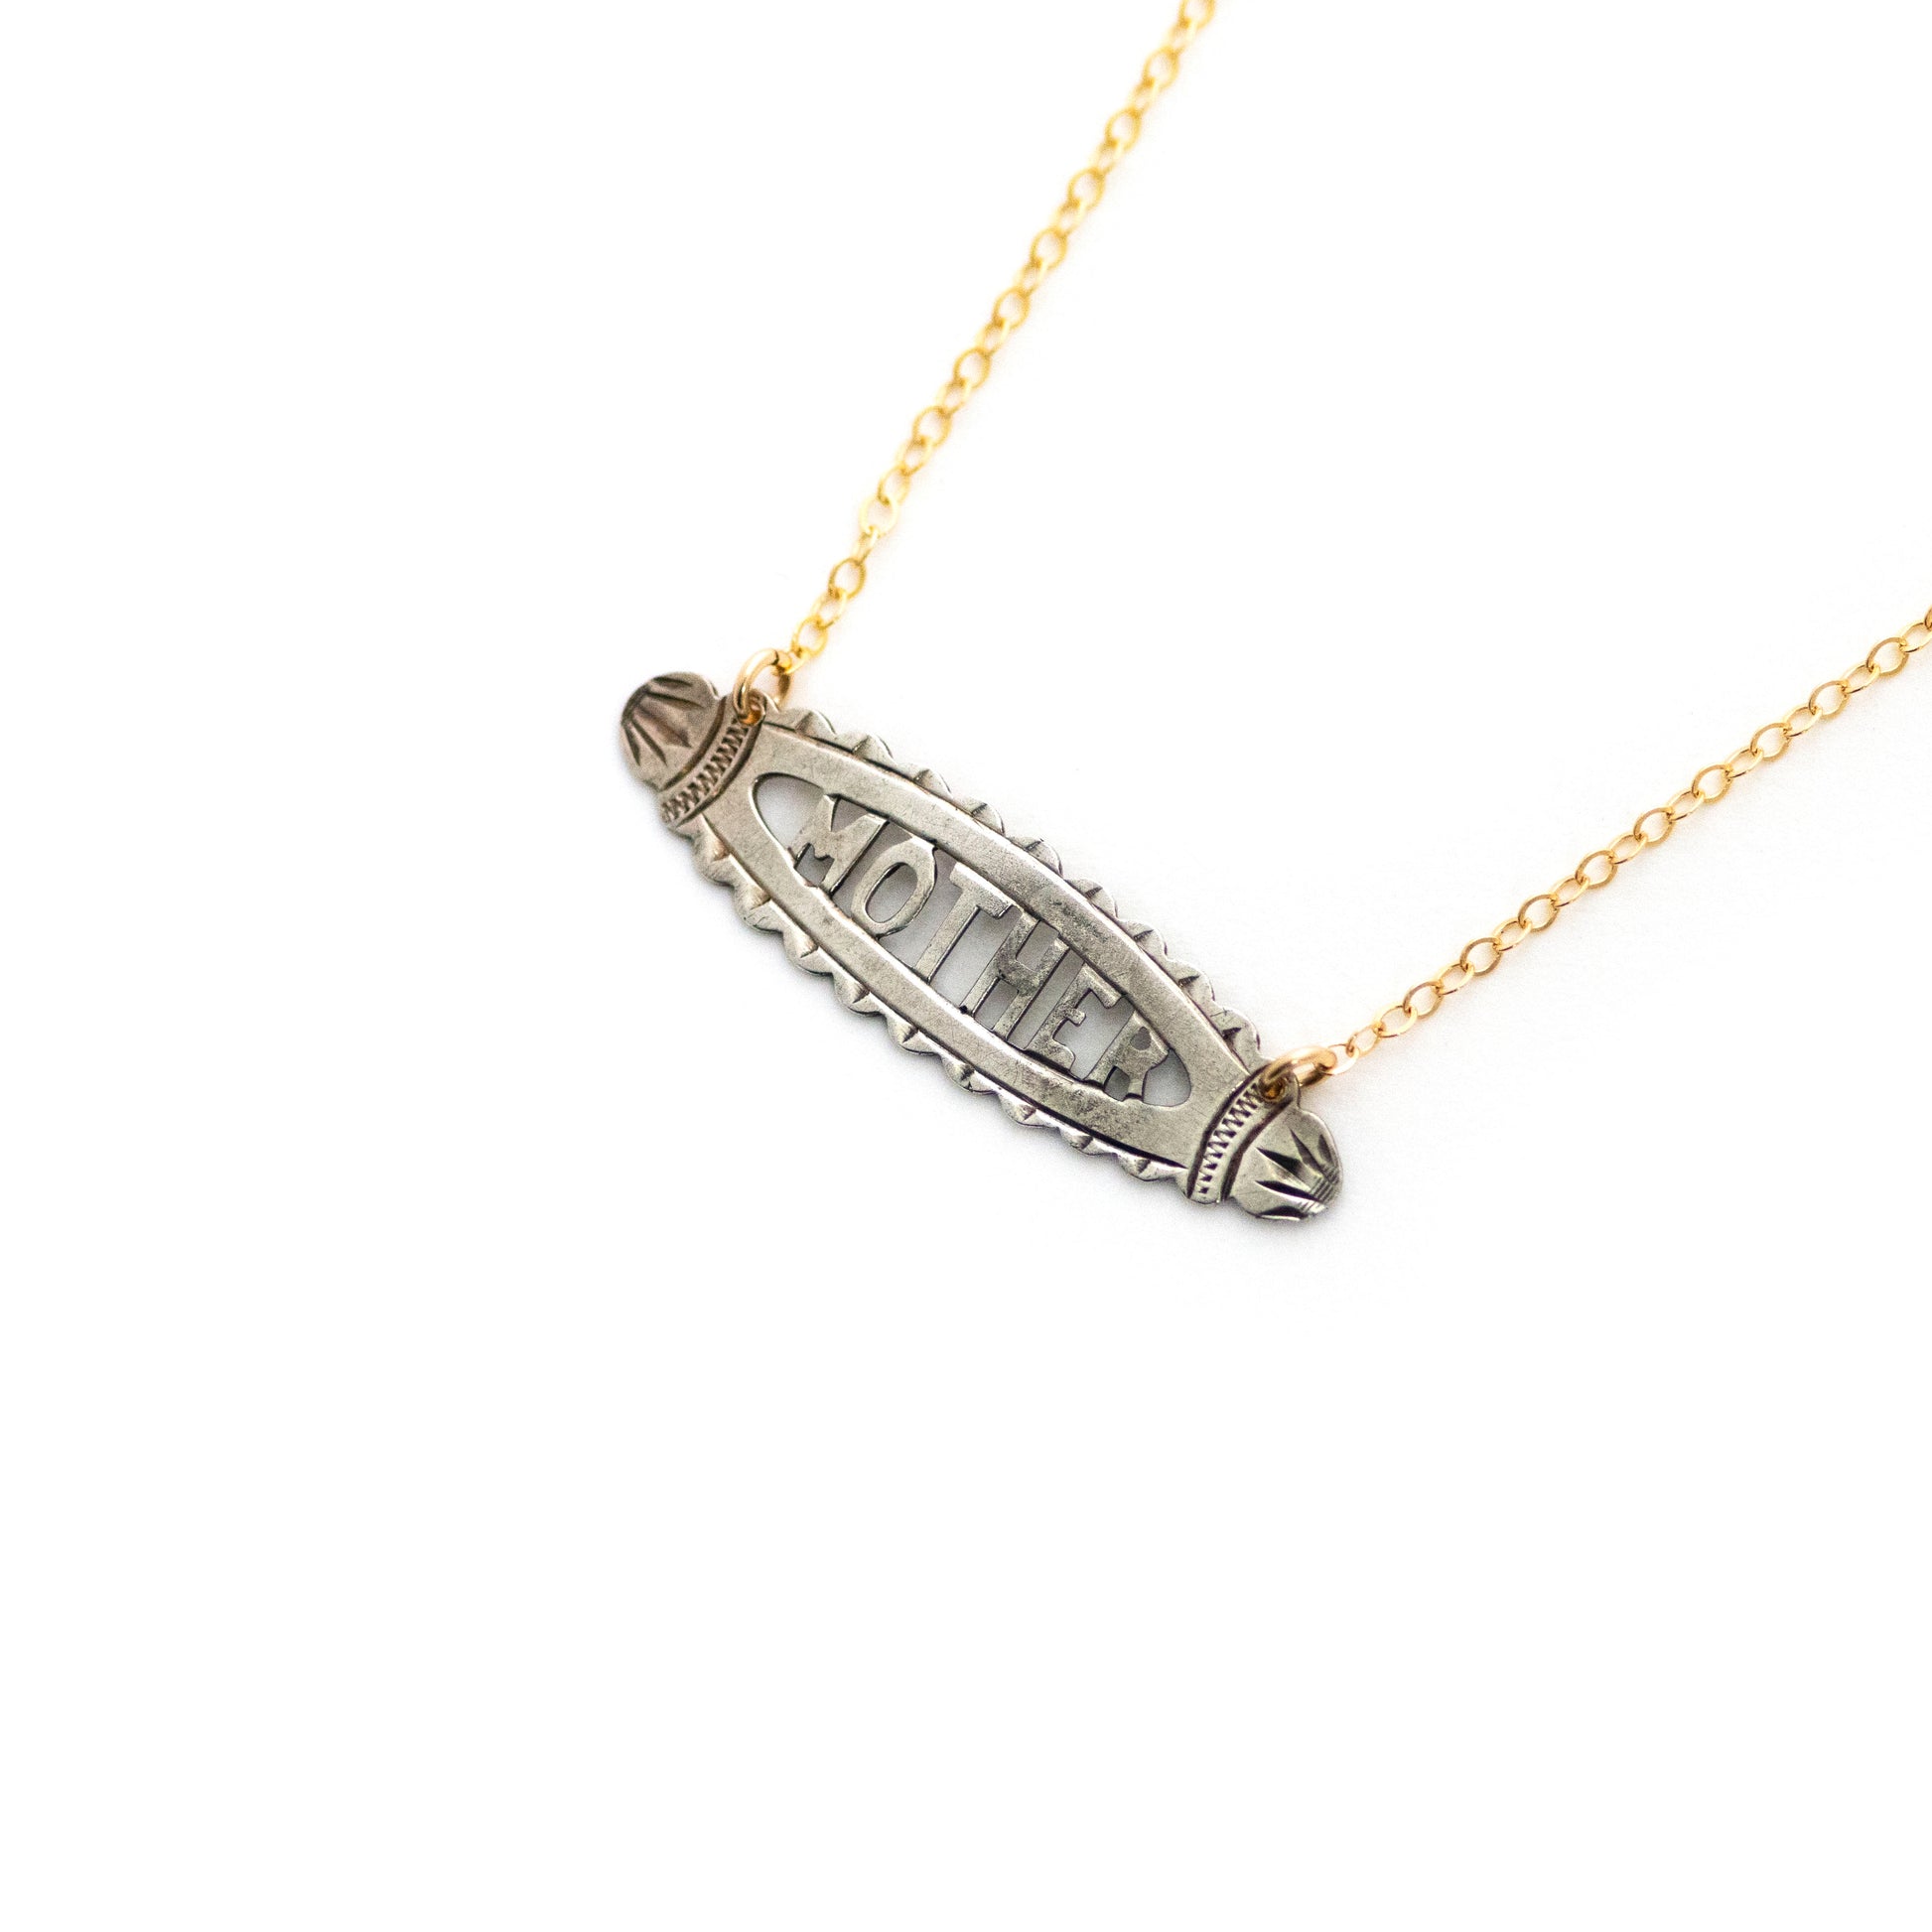 This antique conversion necklace is made up of:  Sterling silver Victorian bar pin pendant from the late 1800s with hand fabricated details depicting the word "MOTHER". Arranged at an angle from a 14k gold filled cable chain that extends toward the top right corner..